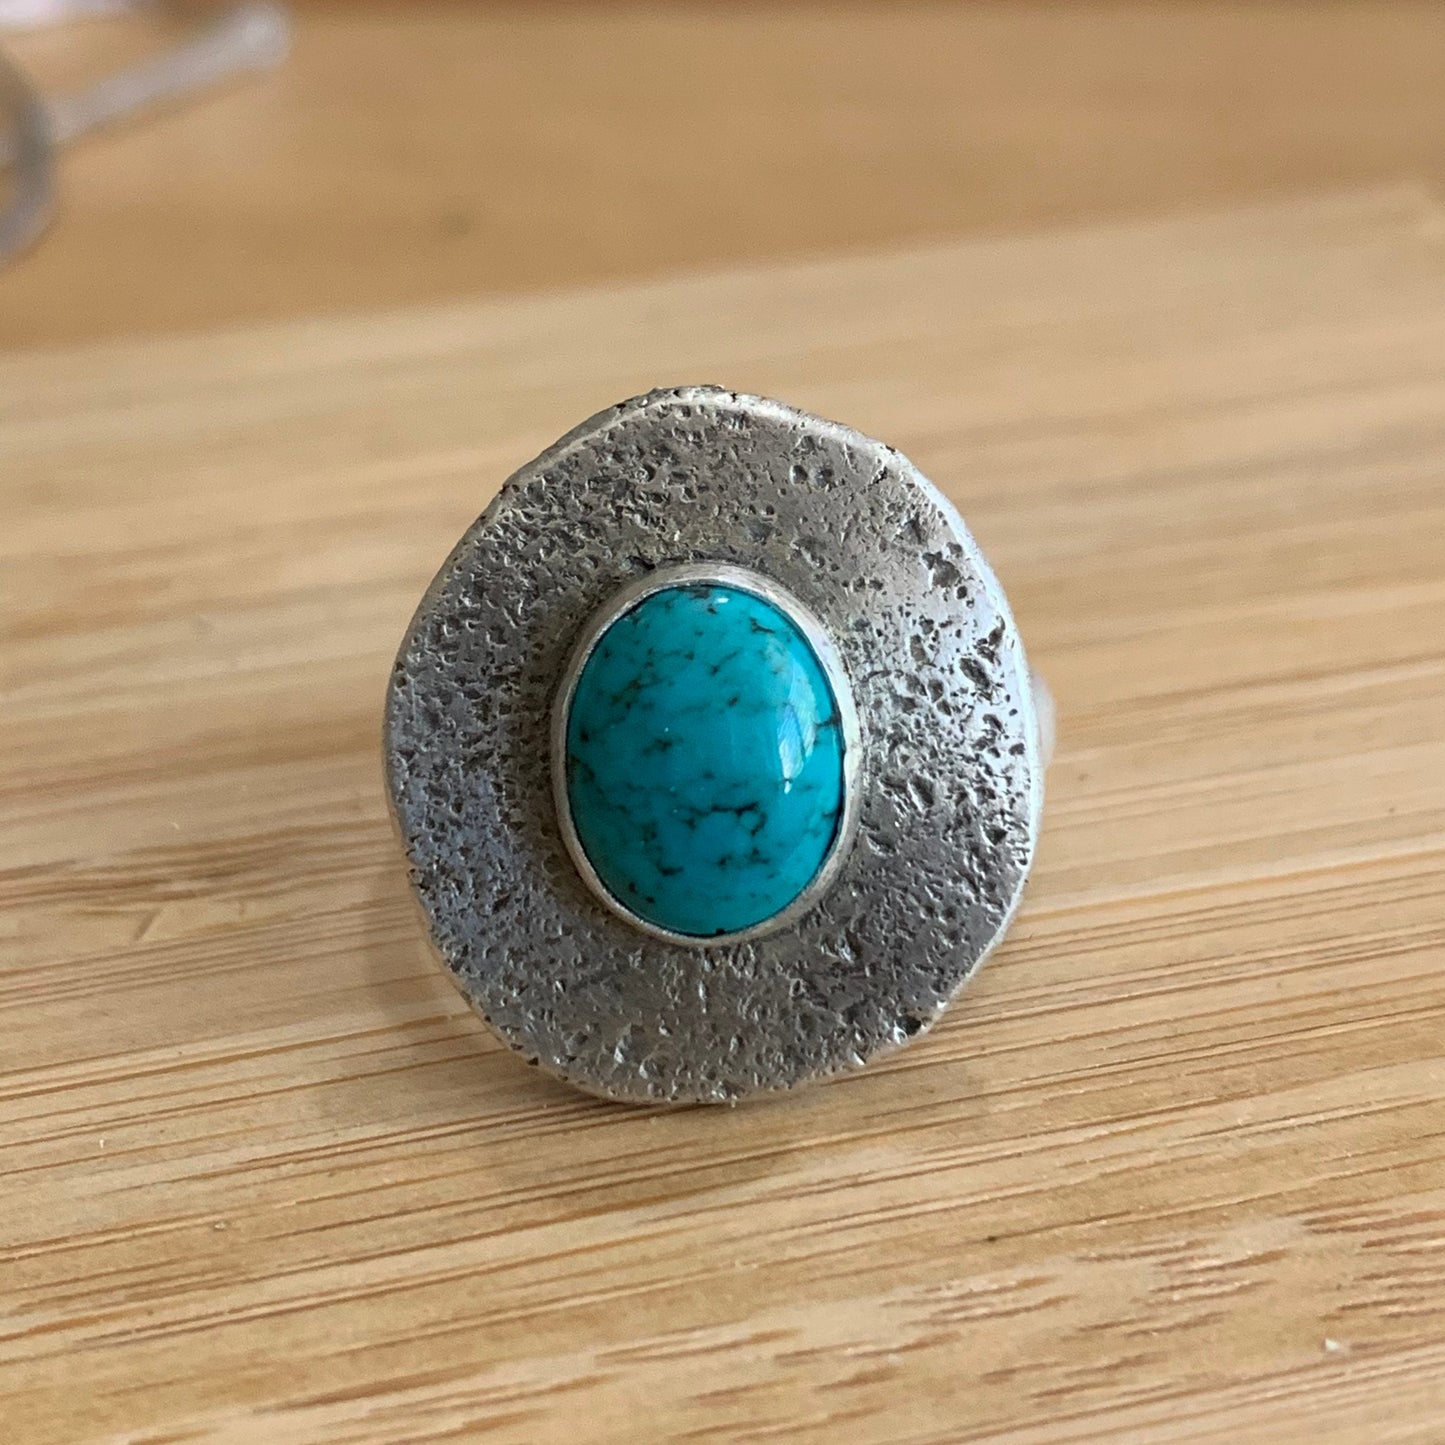 Turquoise ring - statement ring size 7-1/2 - silver and turquoise ring - handmade one-of-a-kind jewelry - modern boho style - unique &unisex